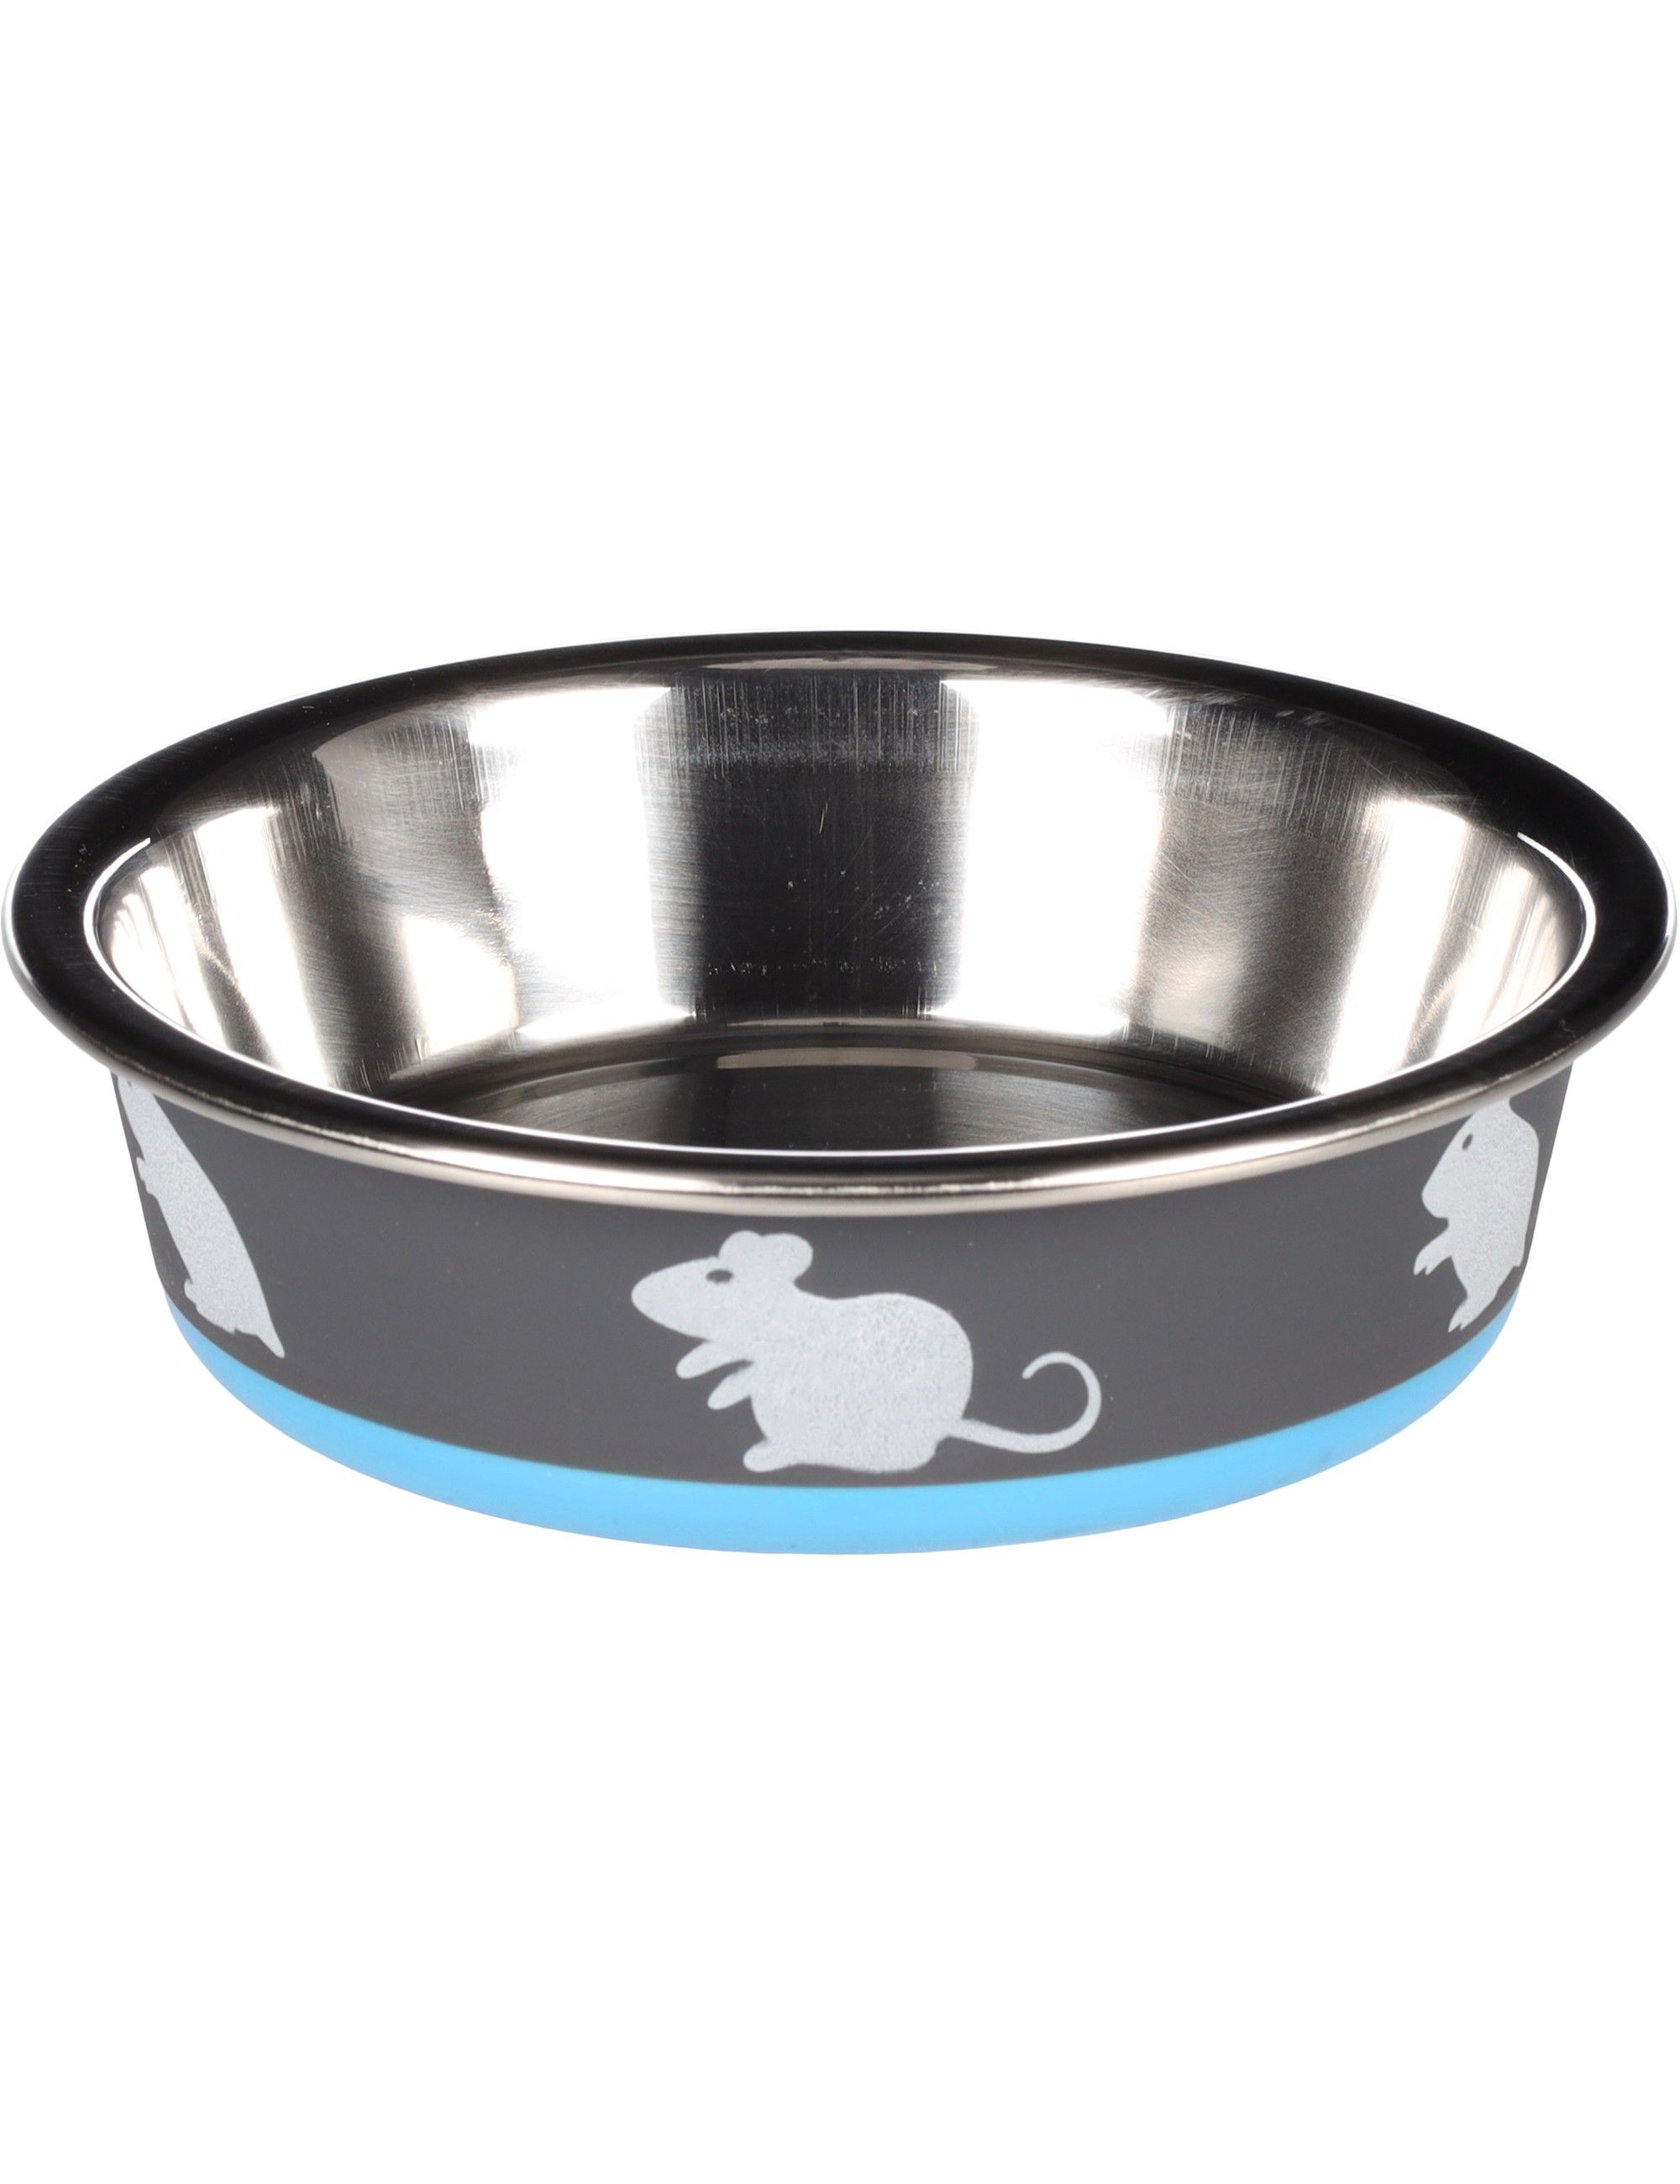 FLAMINGO - Stainless Steel Bowl for Rabbits and Rodents